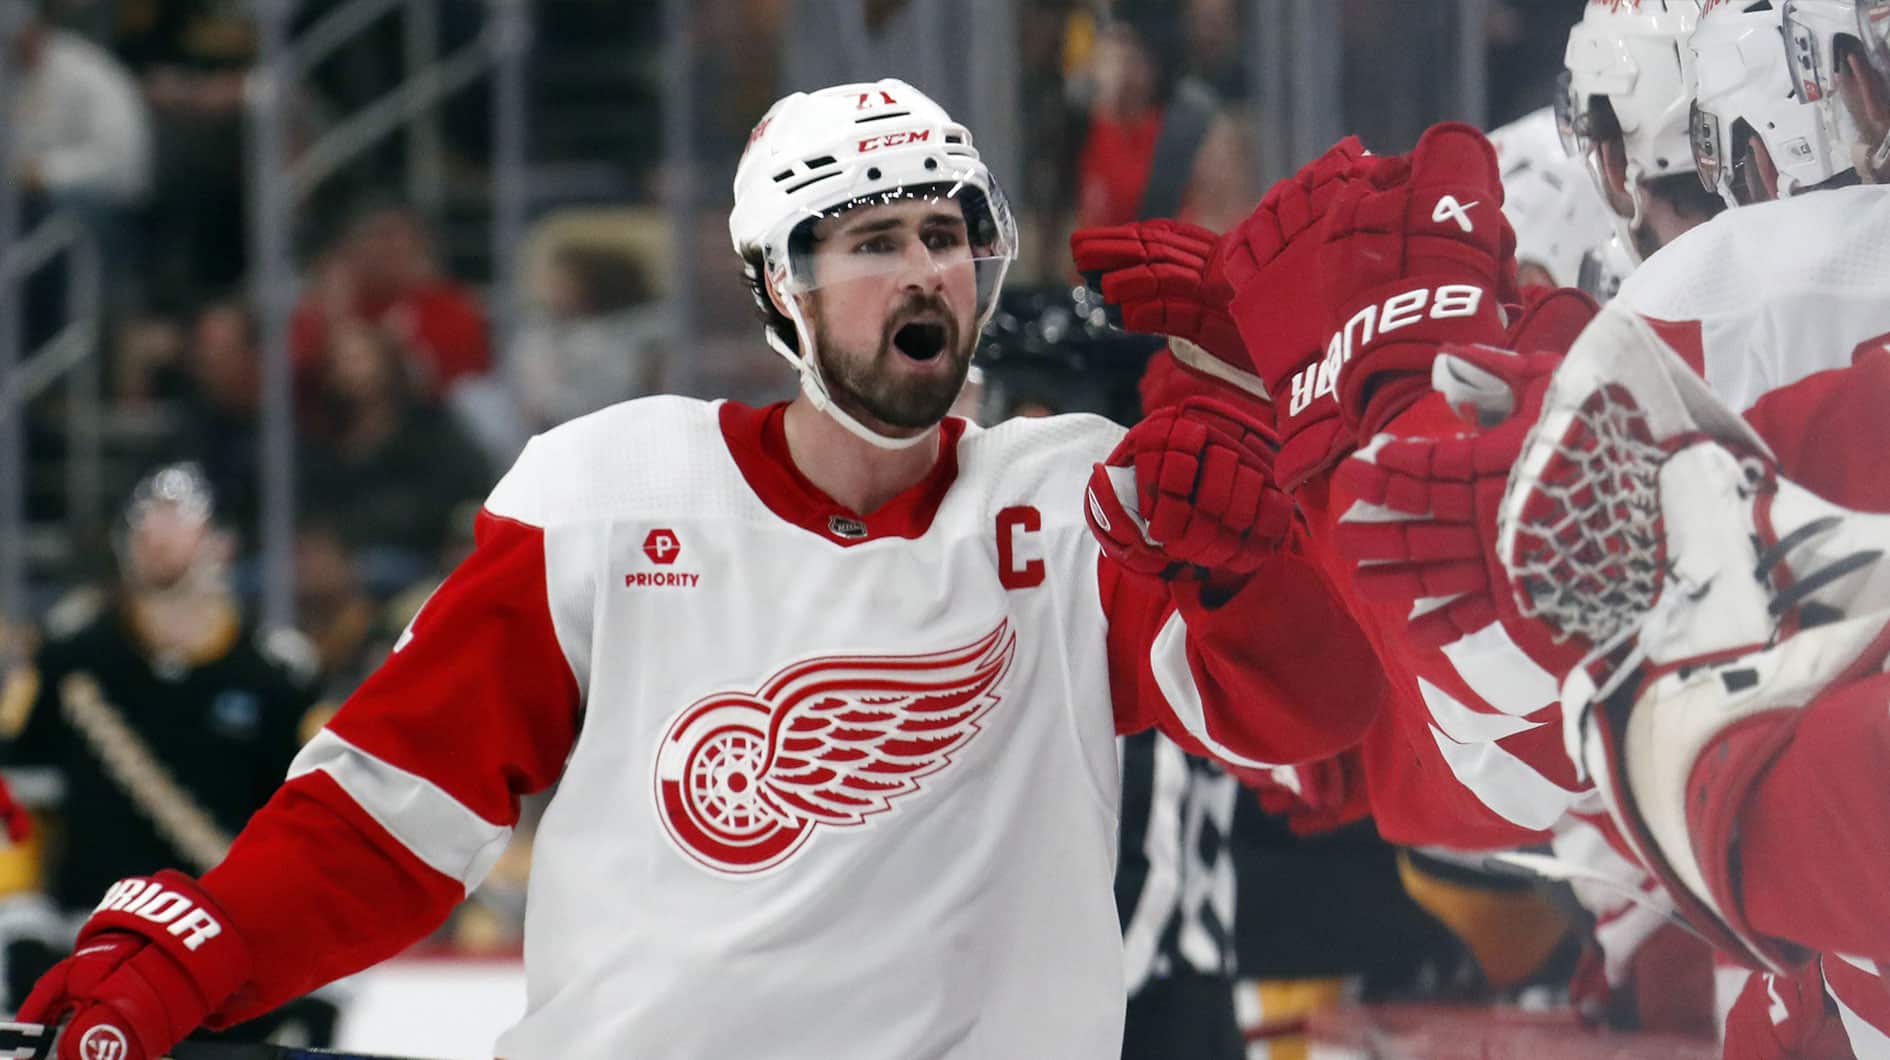 Detroit Red Wings center Dylan Larkin (71) celebrates with the Red Wings bench after scoring a goal against the Pittsburgh Penguins during the third period at PPG Paints Arena. Pittsburgh won 6-5 in overtime.